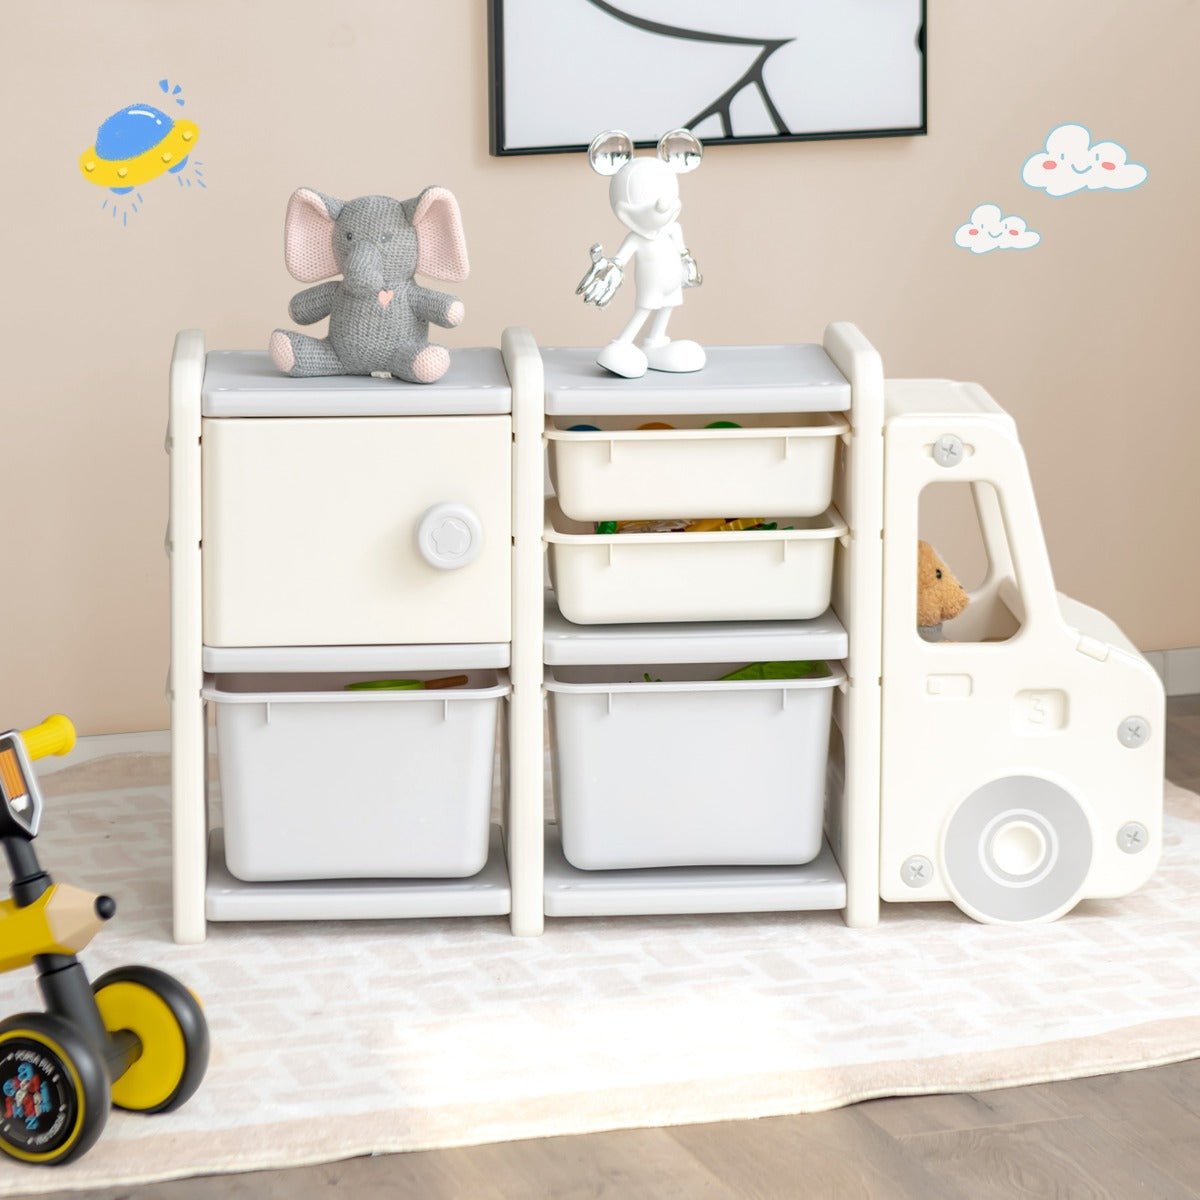 Grey Truck Shaped Kids Storage Cabinet: Where Play Meets Organization